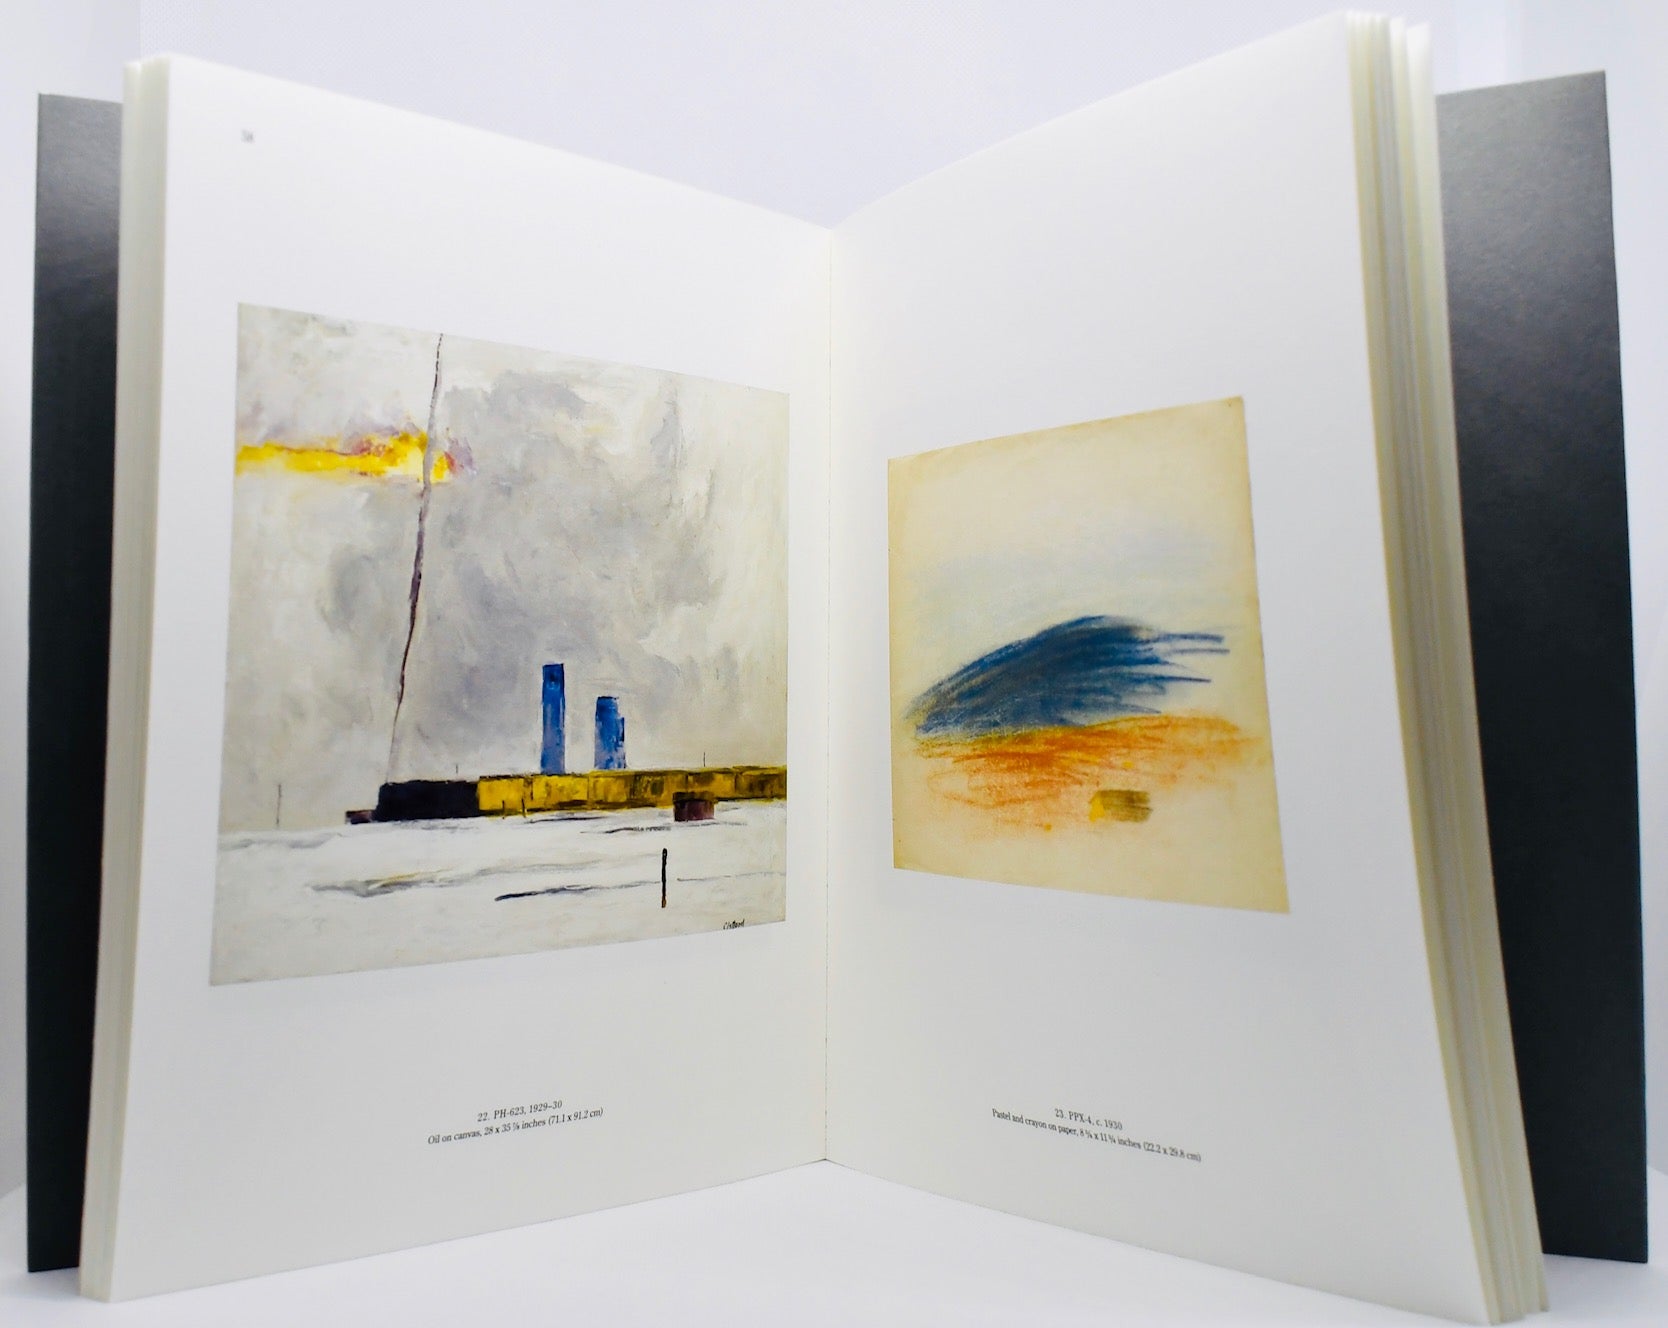 Open copy of ‘The Early Years: Clyfford Still in Canada, 1920-1933’ featuring PH-623 and PPX-4.